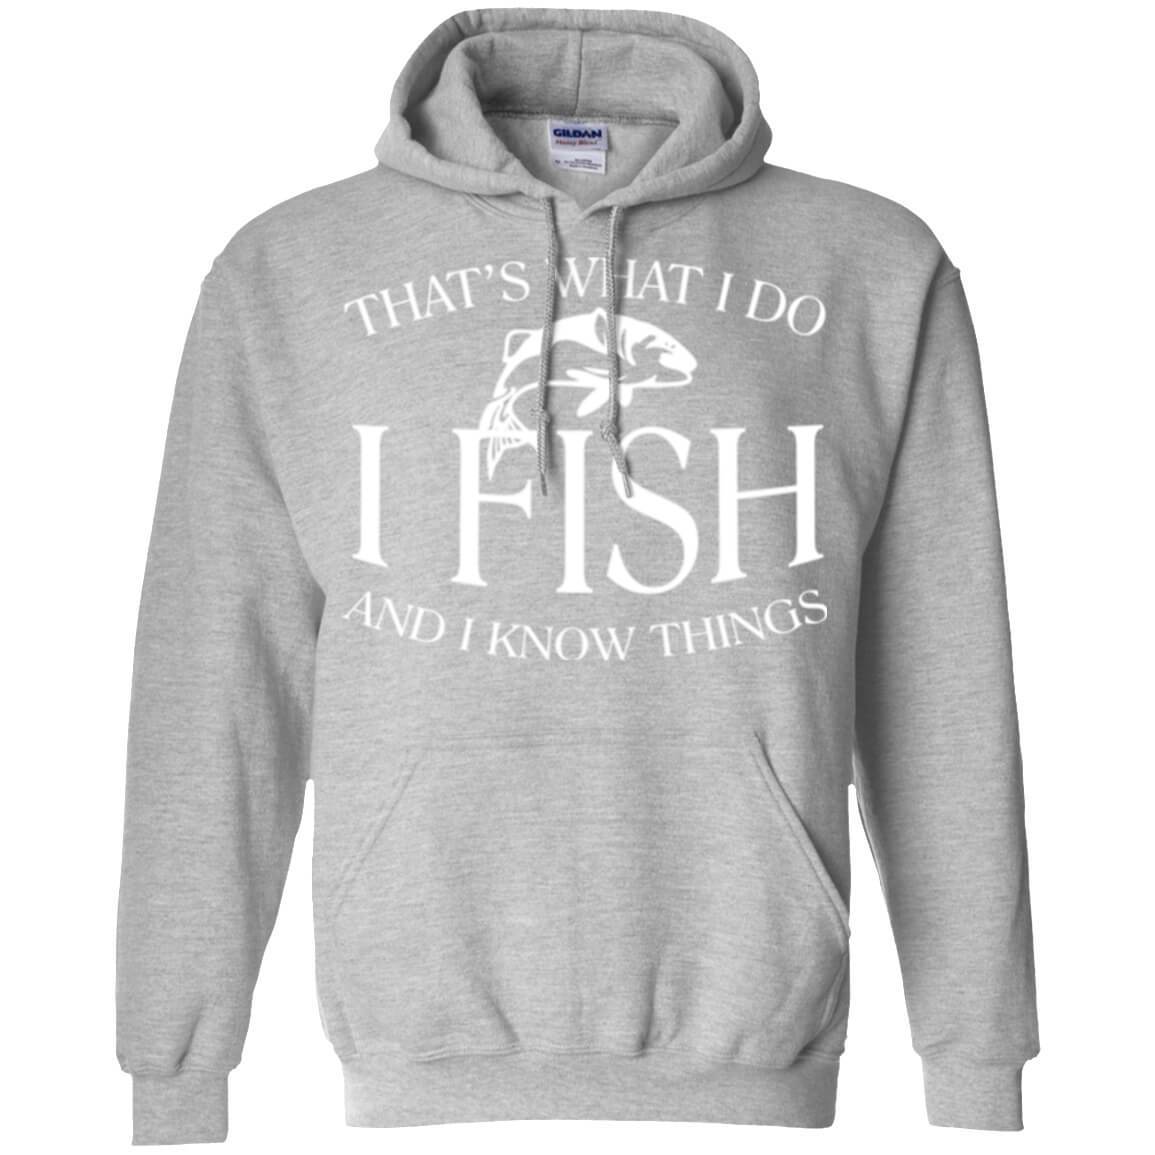 That's What I Do Pullover Hoodie b